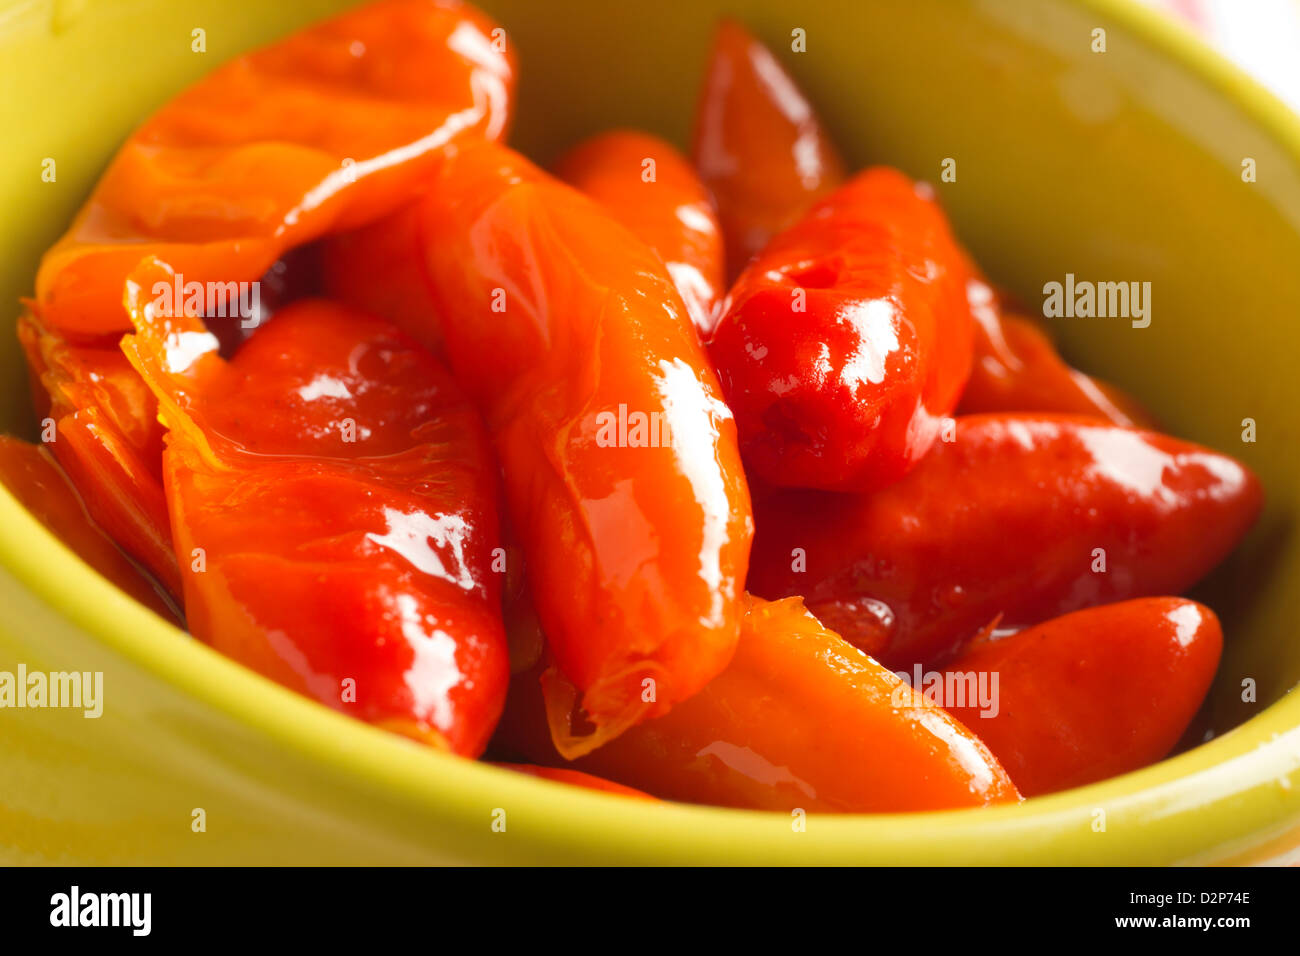 Aji Picante, tiny red Mexican pickled peppers Stock Photo